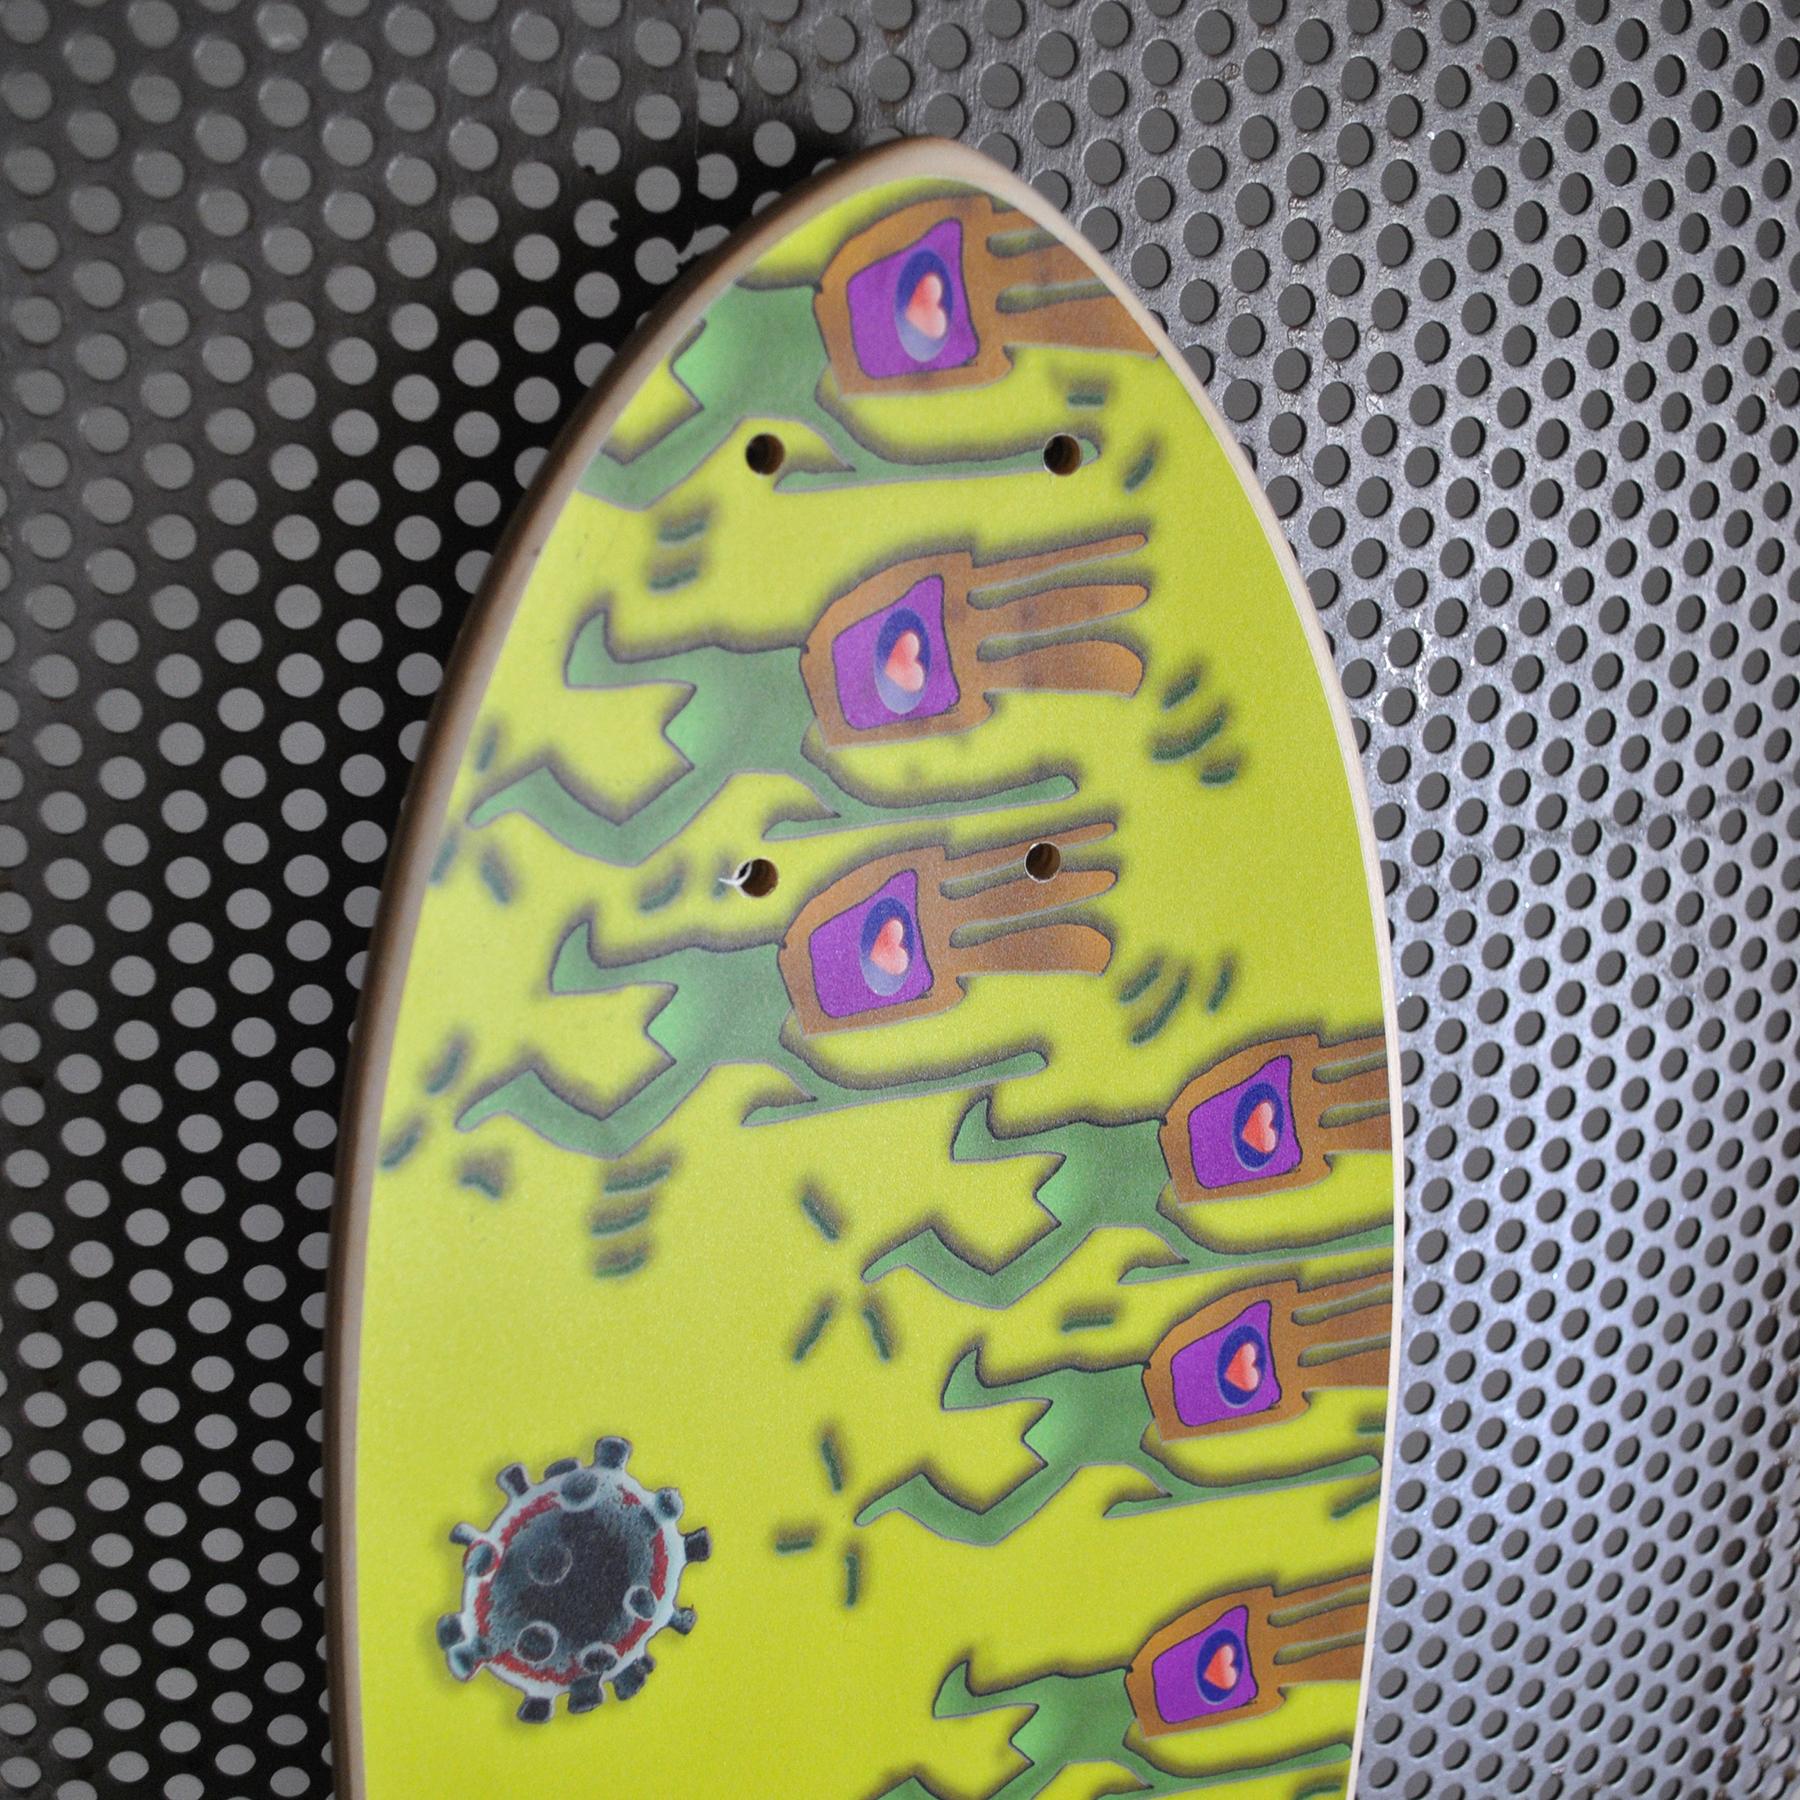 Cold-Painted Skate Deck Handmade in Italy Limited Edition by Pio Schena